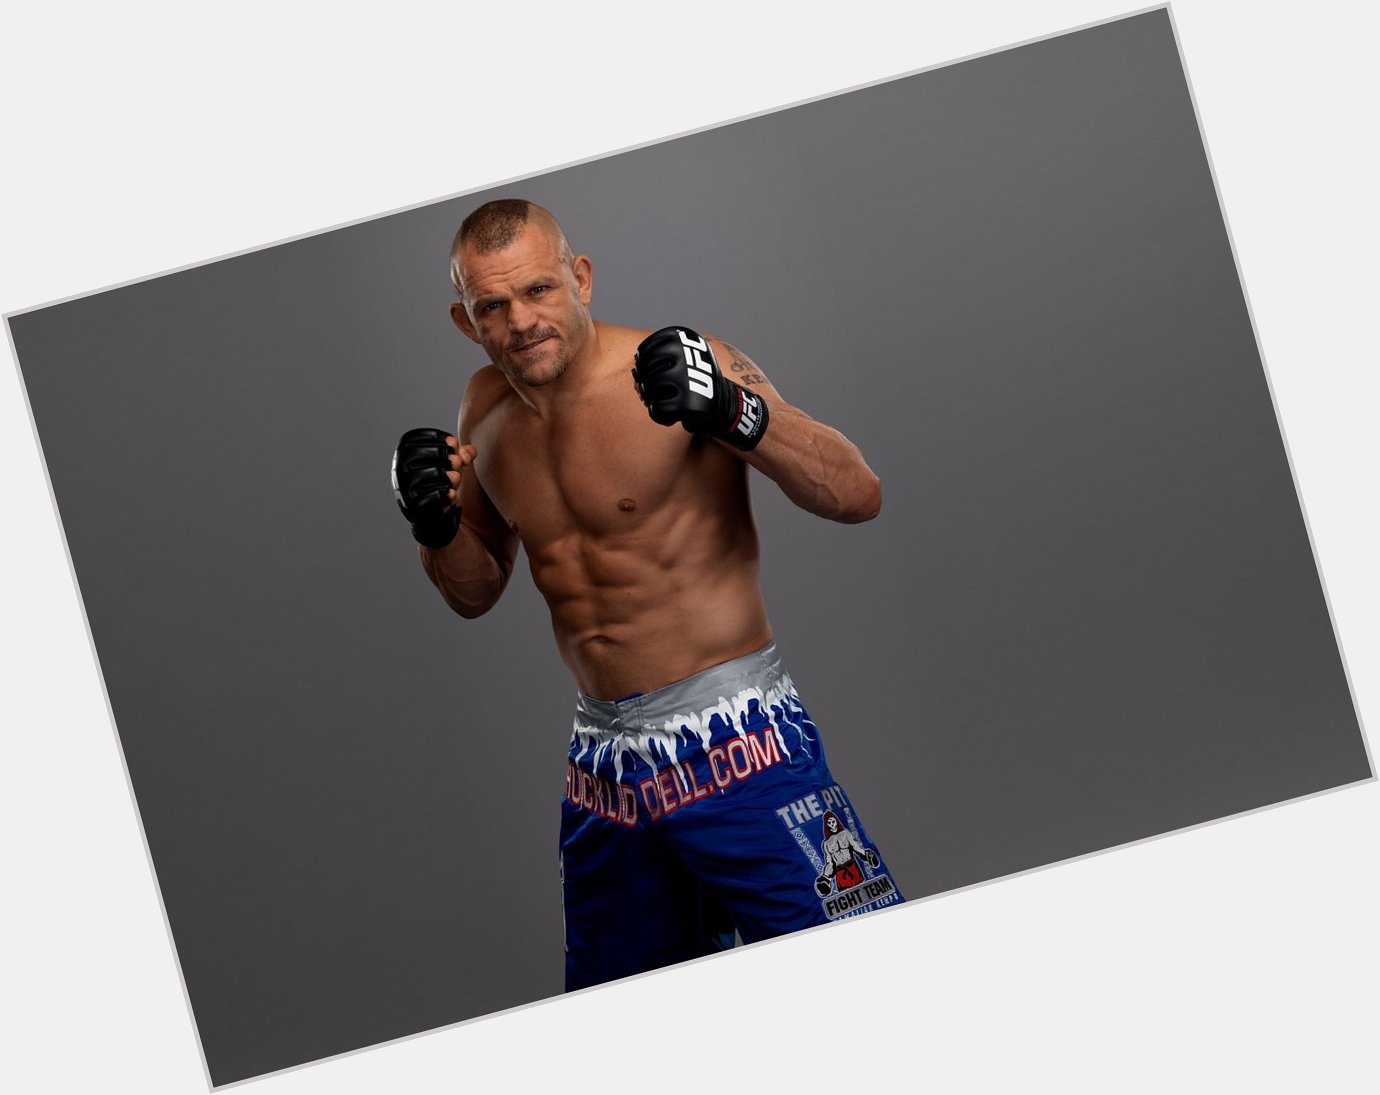 Happy Birthday to Chuck Liddell who turns 48 today! 